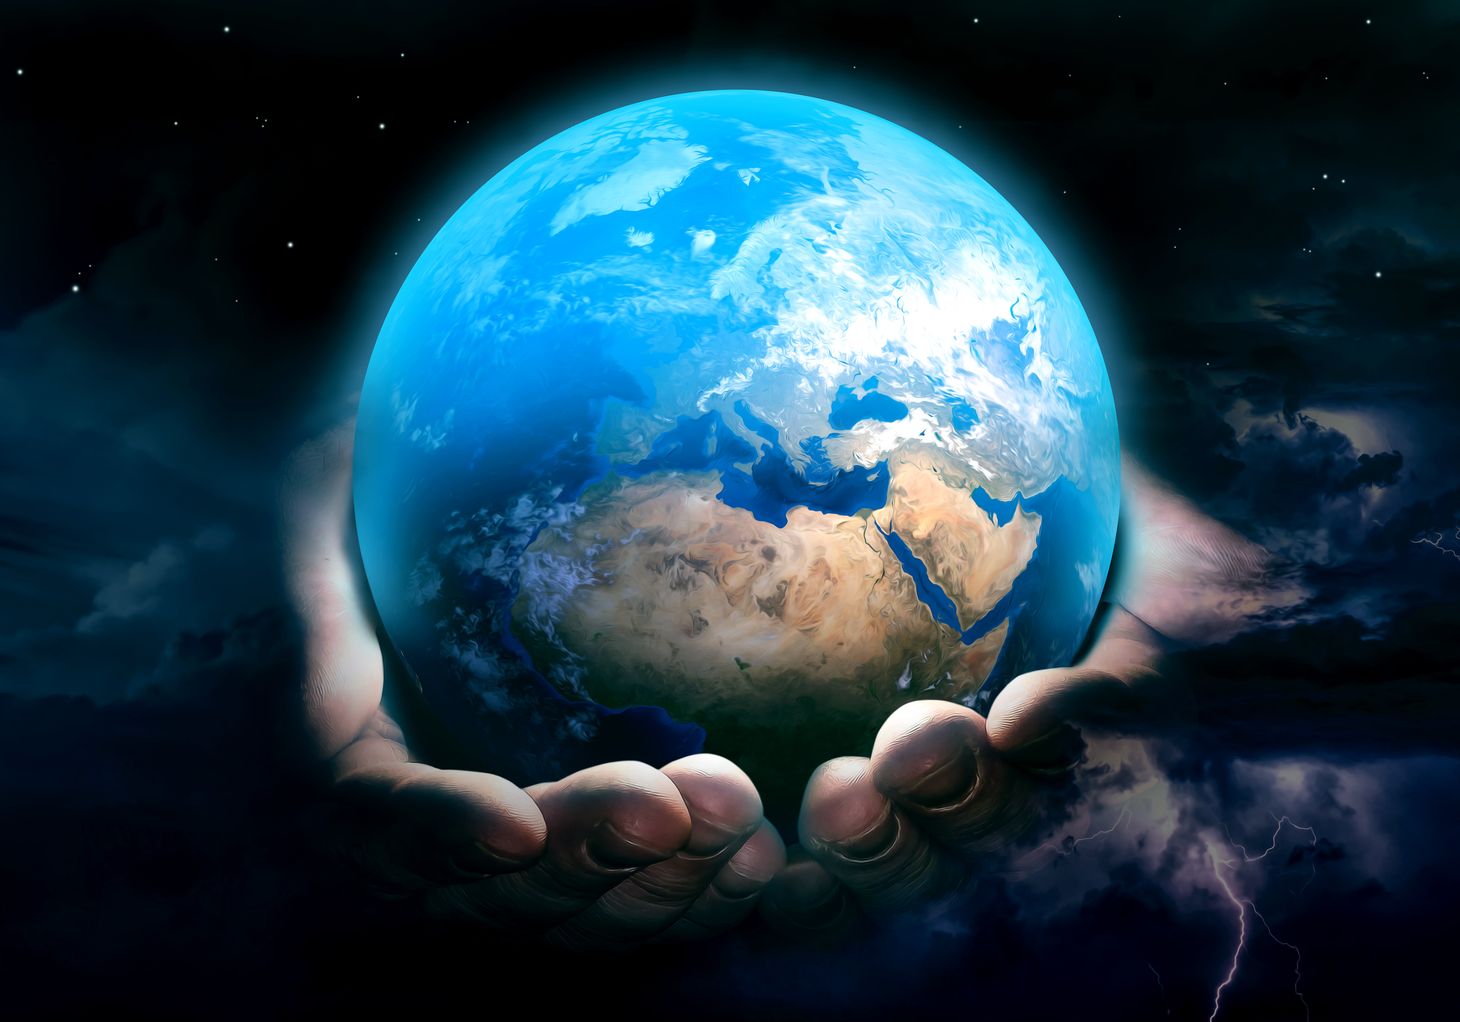 Image of the Earth in Gods hands